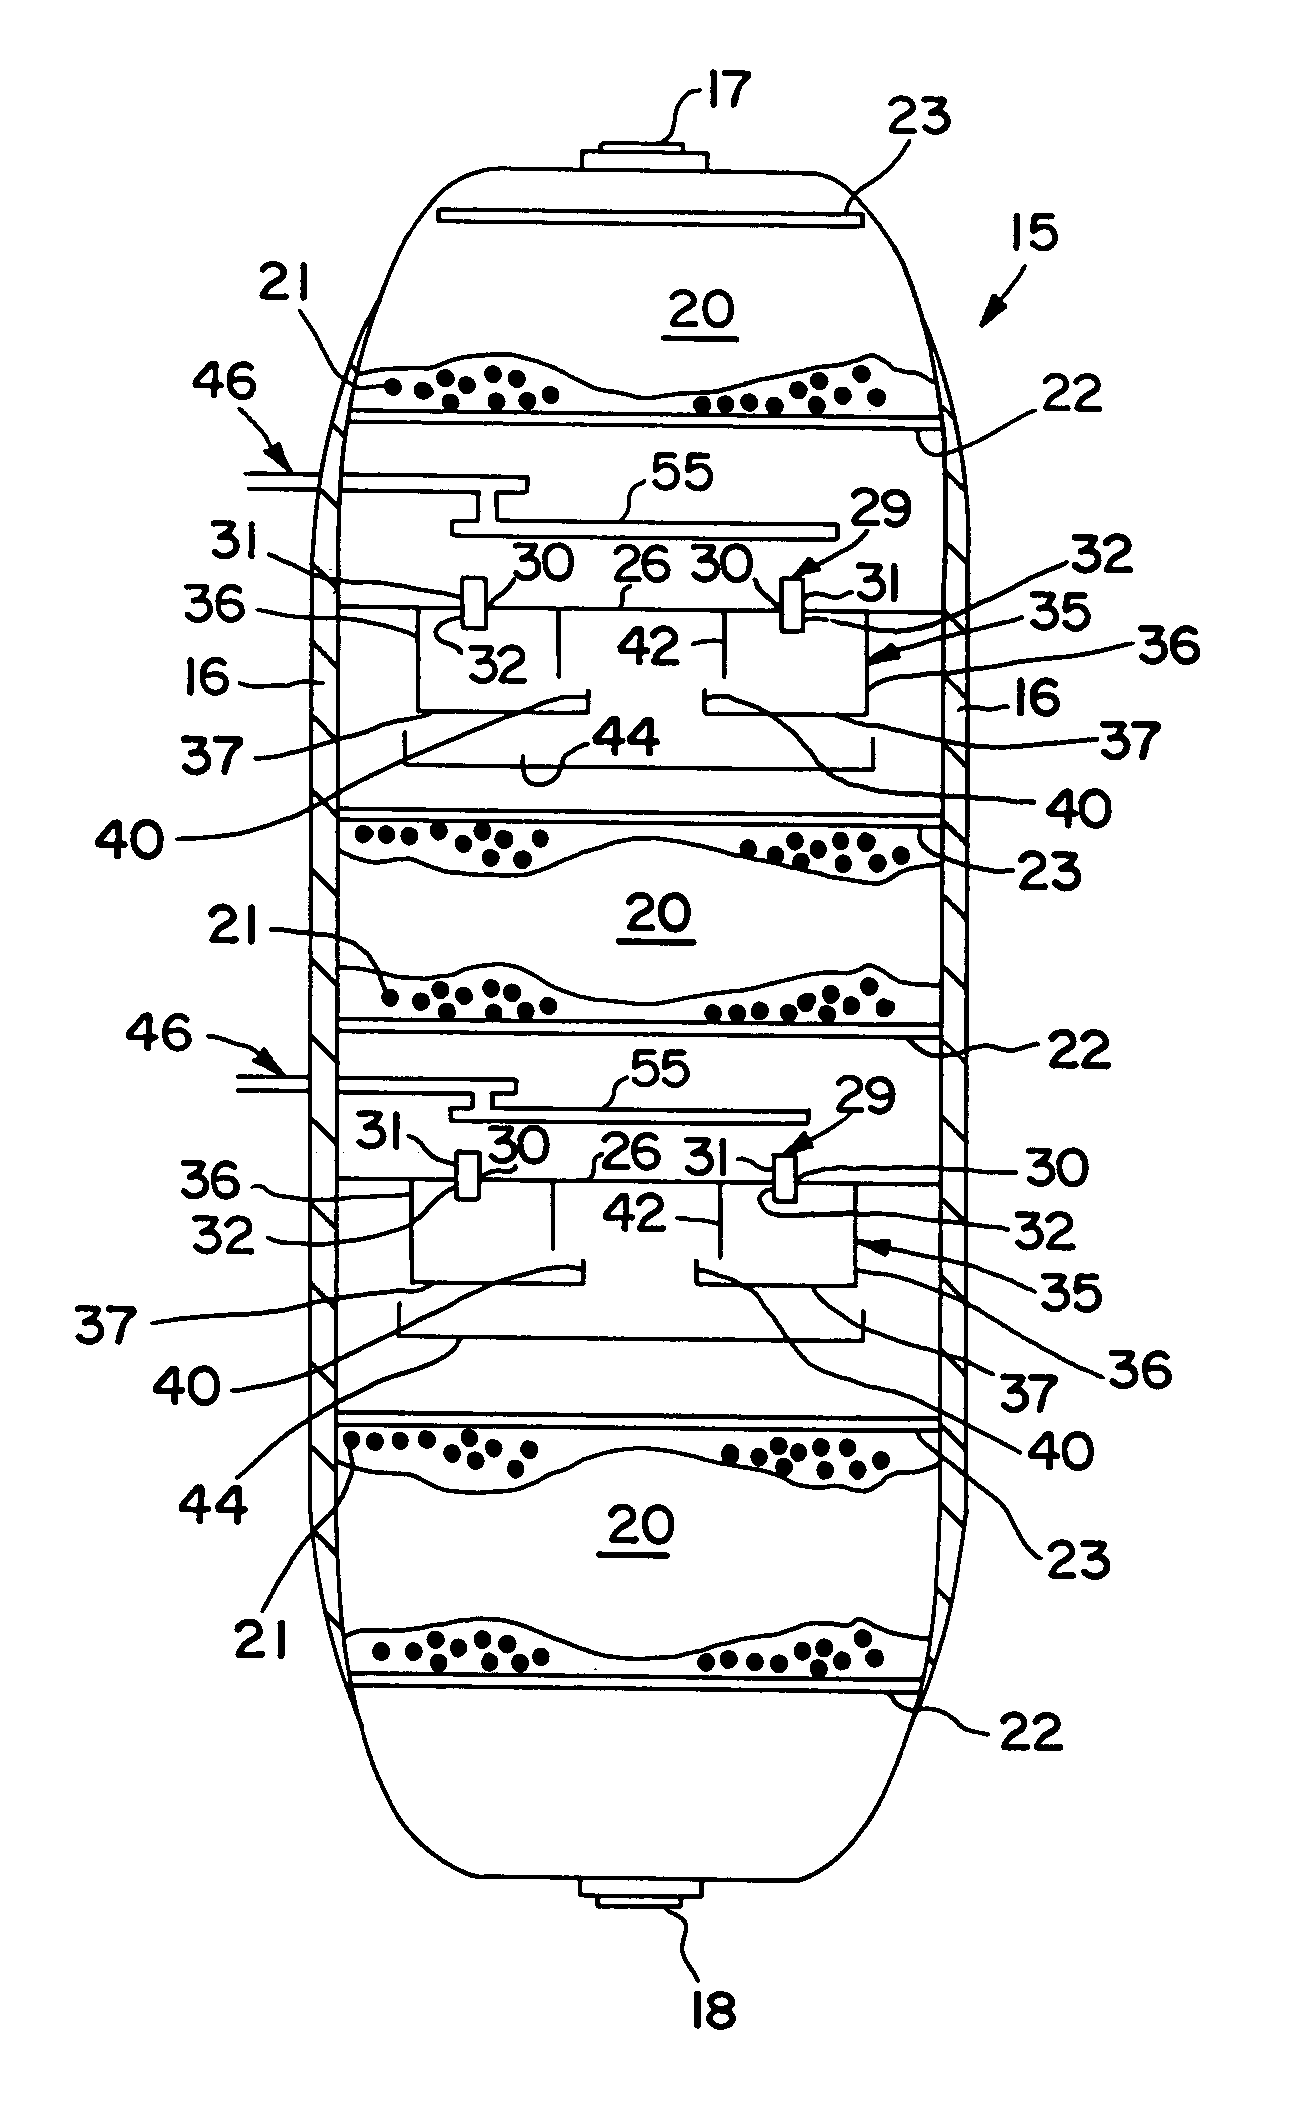 Multiphase mixing device with improved quench injection for inducing rotational flow